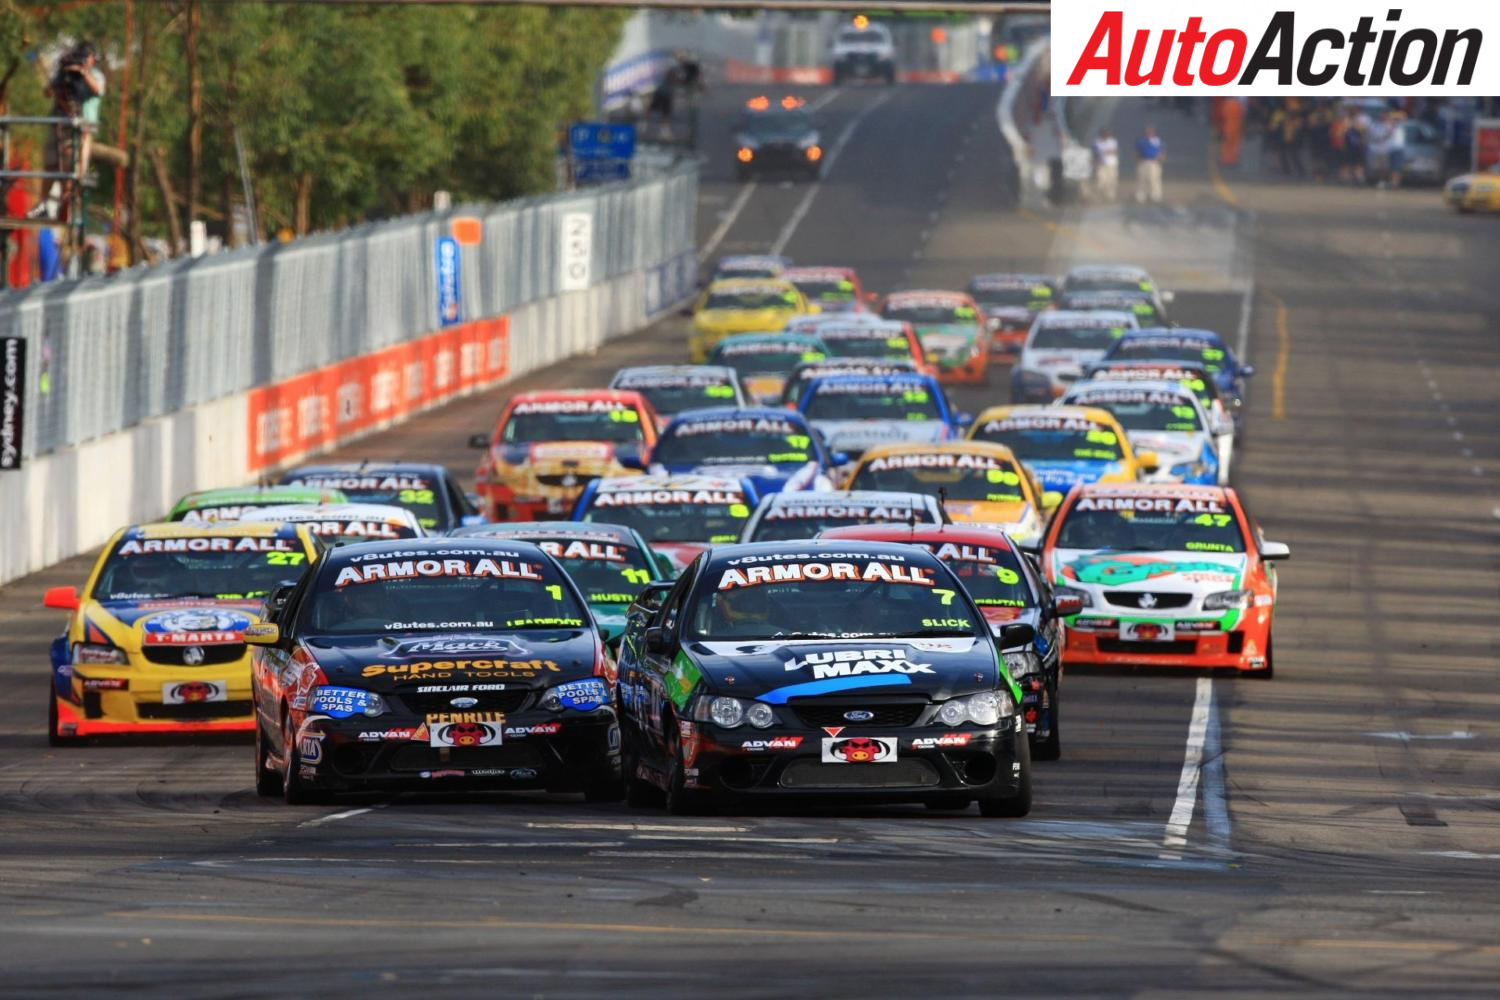 V8 Utes won't be replaced until 2018 now - Photo: Dirk Klynsmith